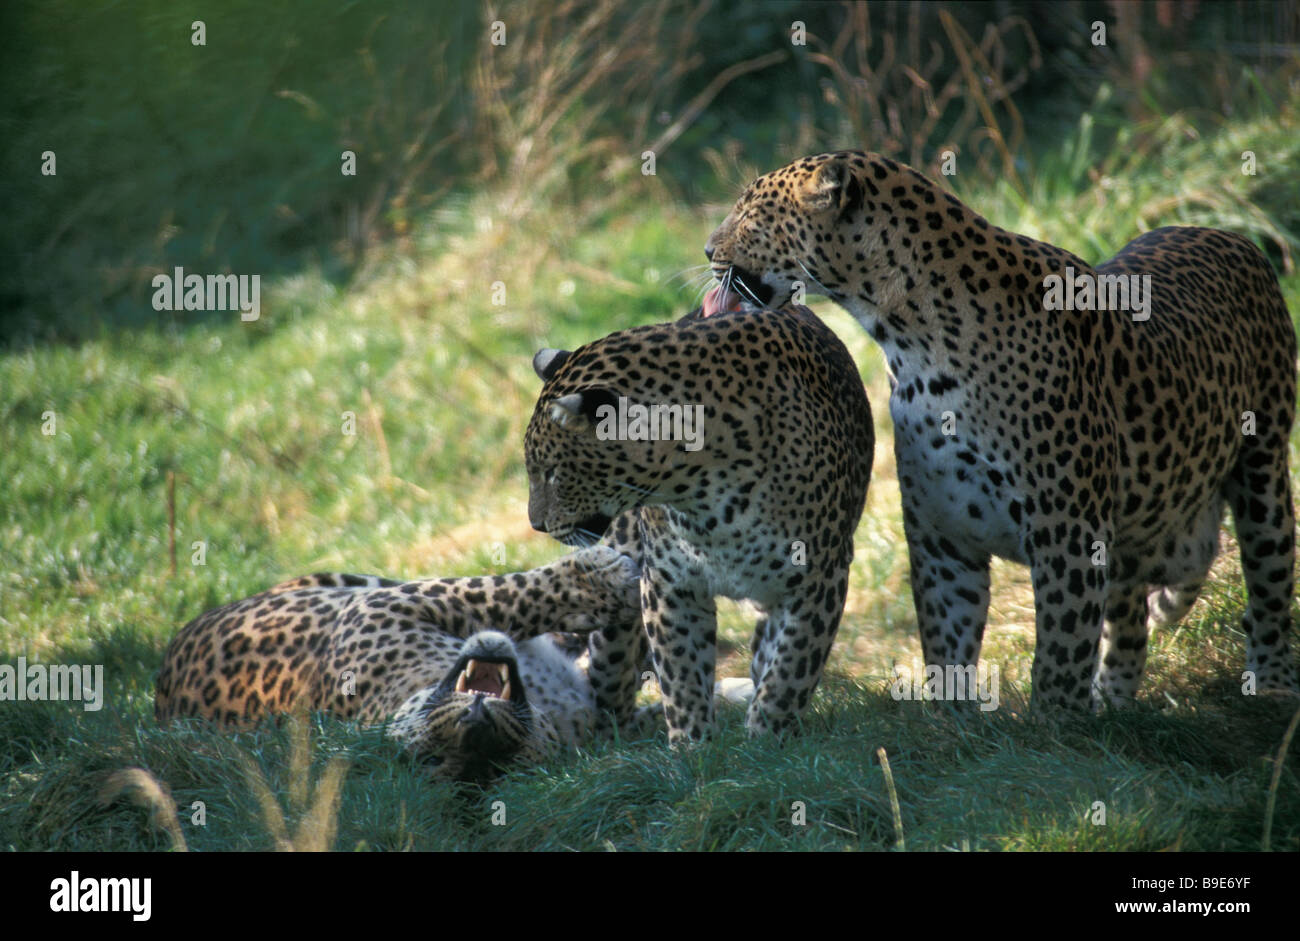 Leopards pair mating Panthera pardus adult affection affectionate Africa animal animal communication animal head animal portrait Stock Photo